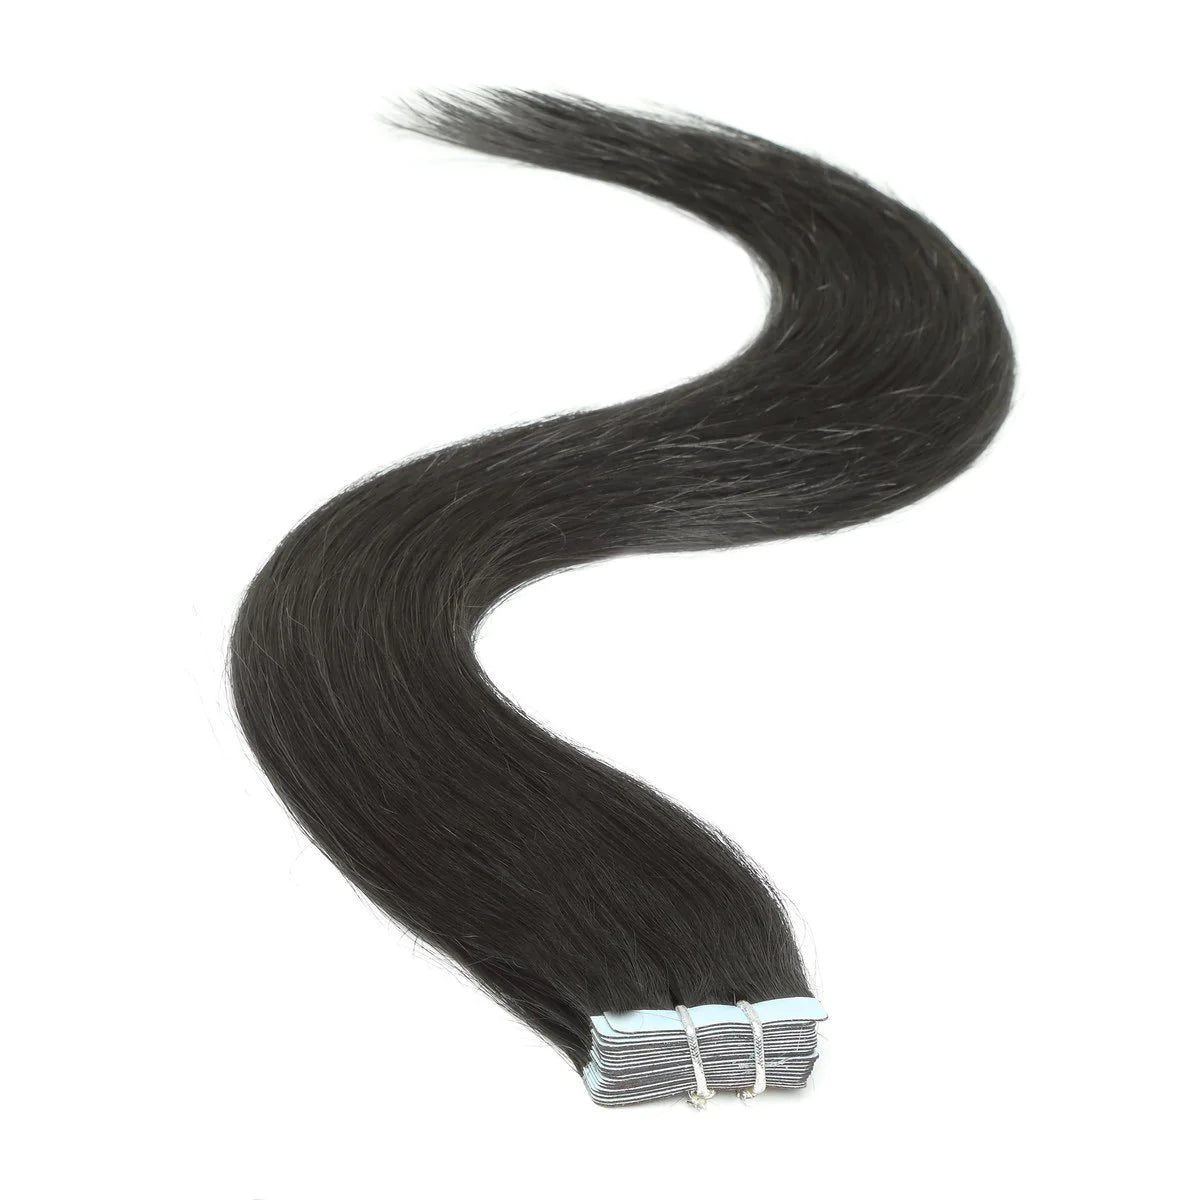 A Step-by-Step Guide on How to Remove Tape Hair Extensions Safely - beautyhair.co.uk